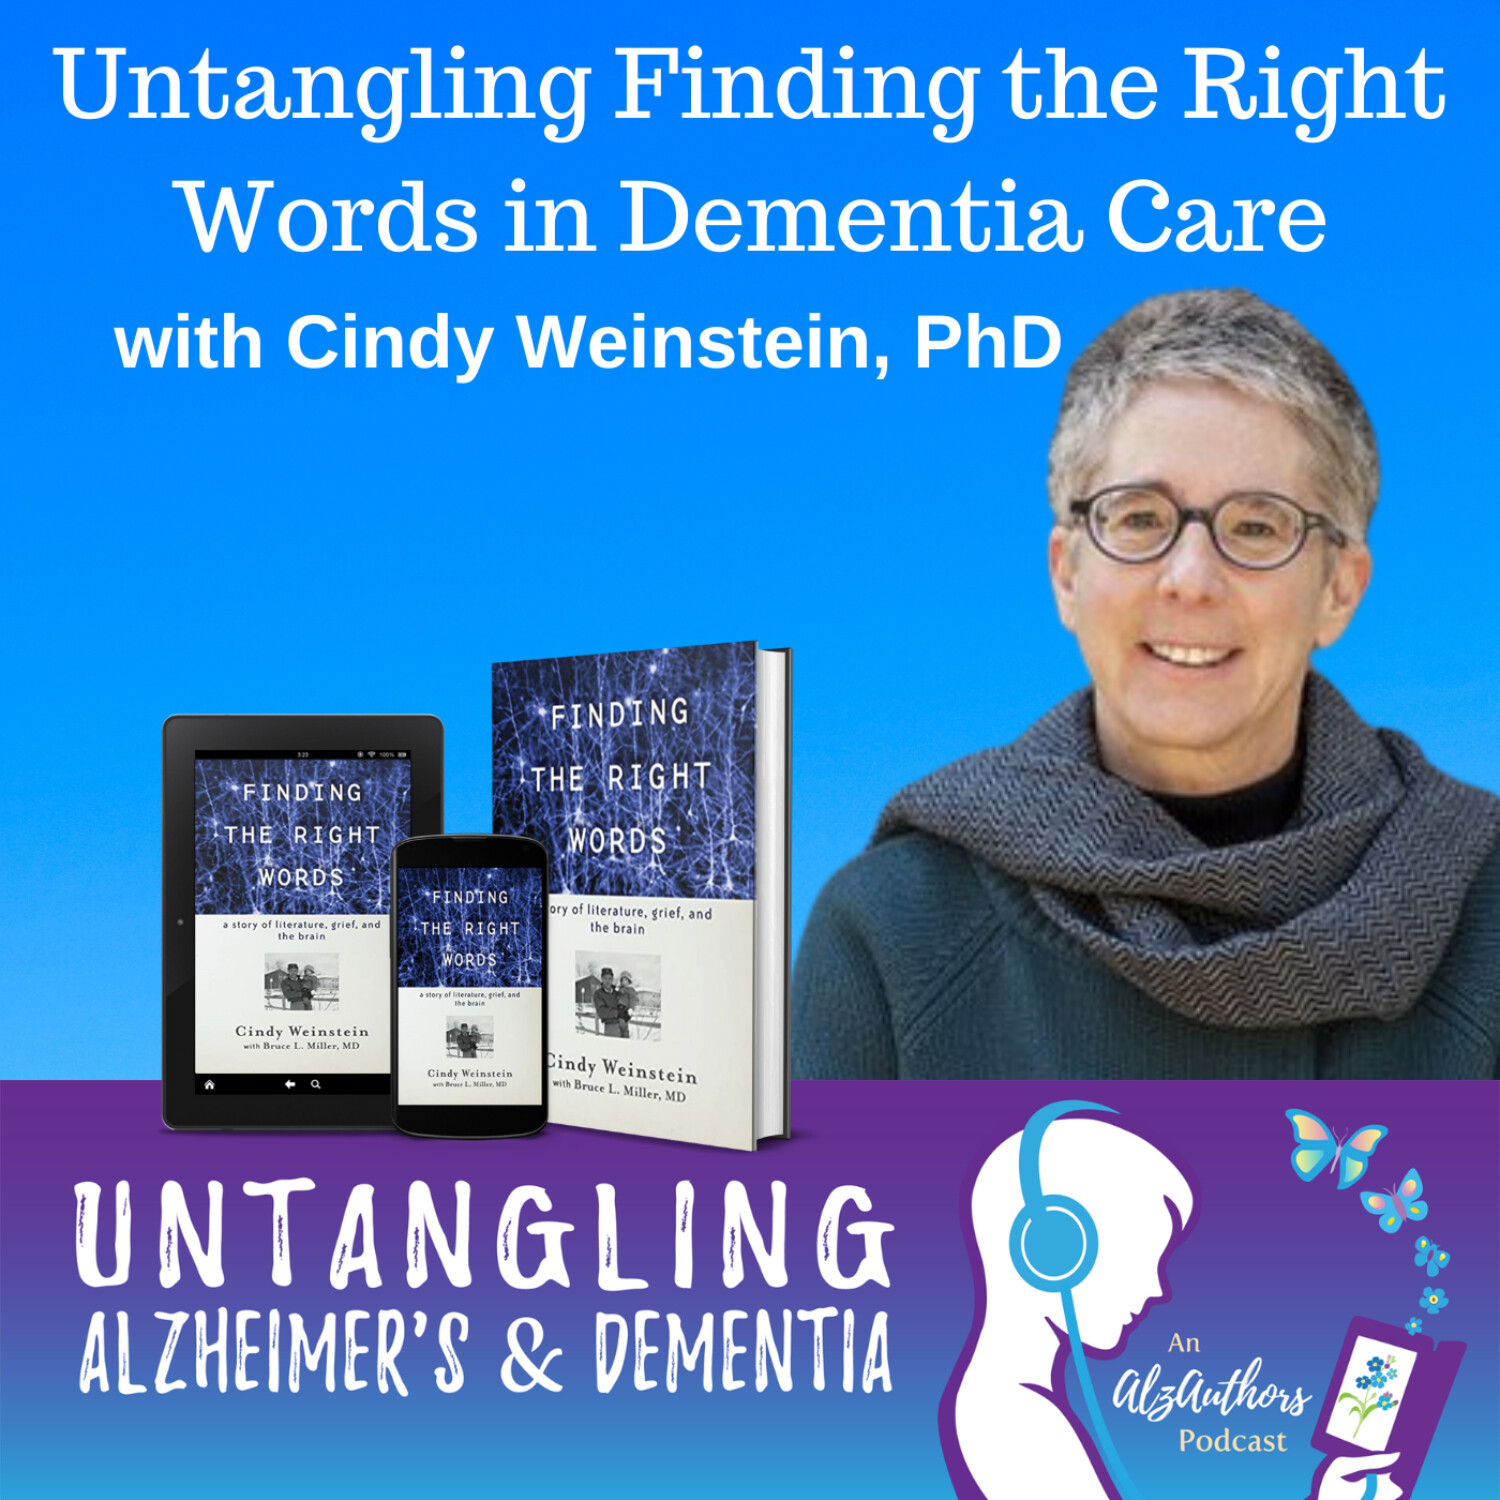 Cindy Weinstein Untangles Finding the Right Words in Dementia Care